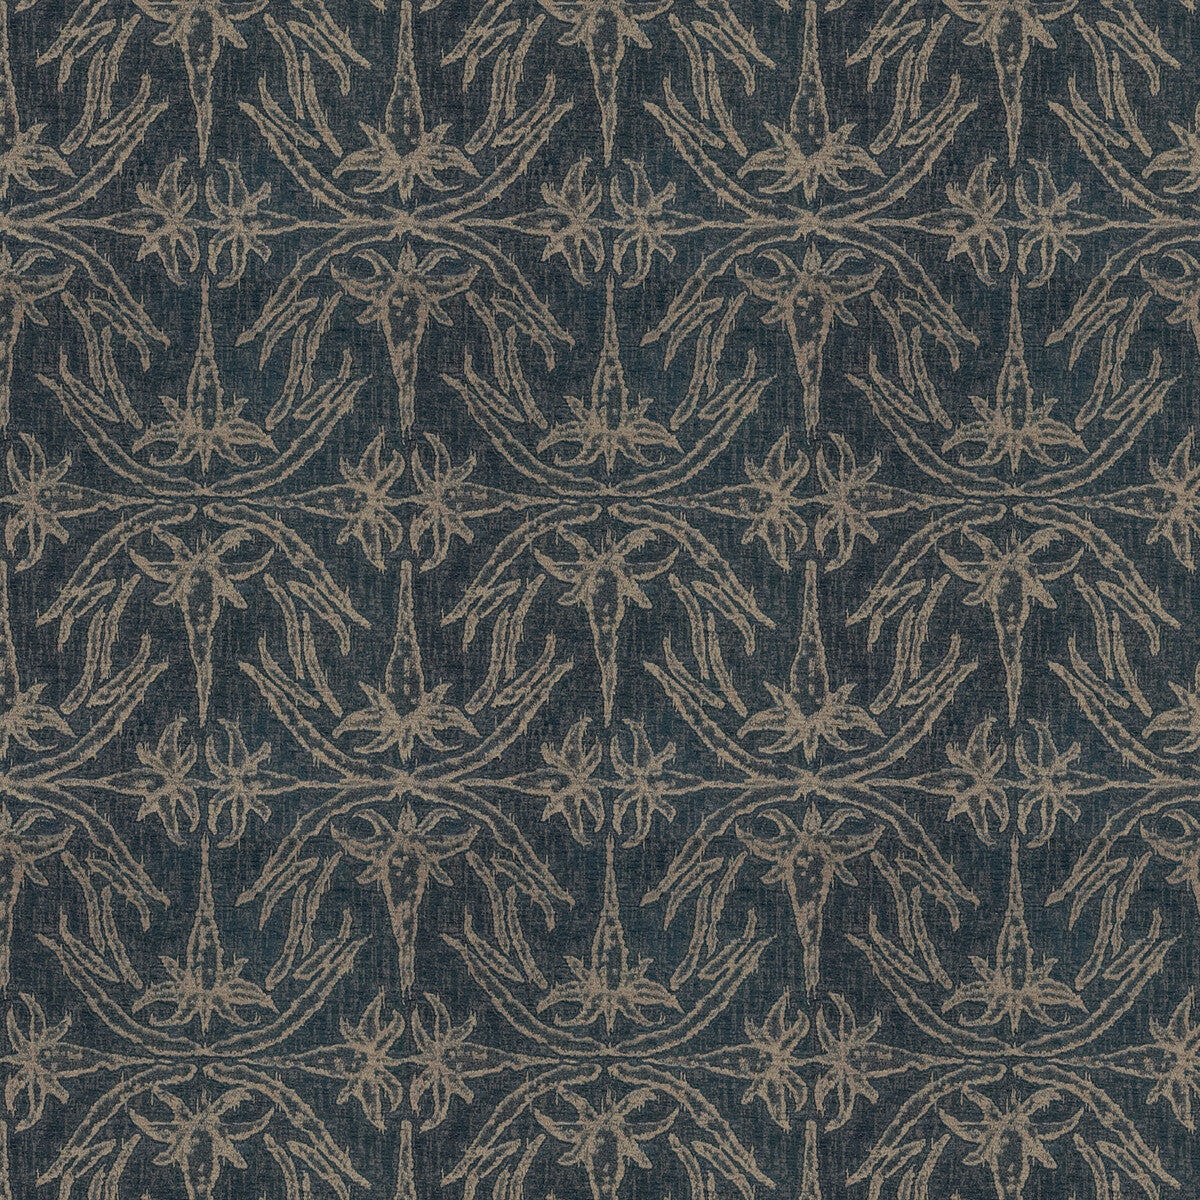 Lily Branch fabric in midnight color - pattern GWF-2926.50.0 - by Lee Jofa Modern in the Allegra Hicks II collection